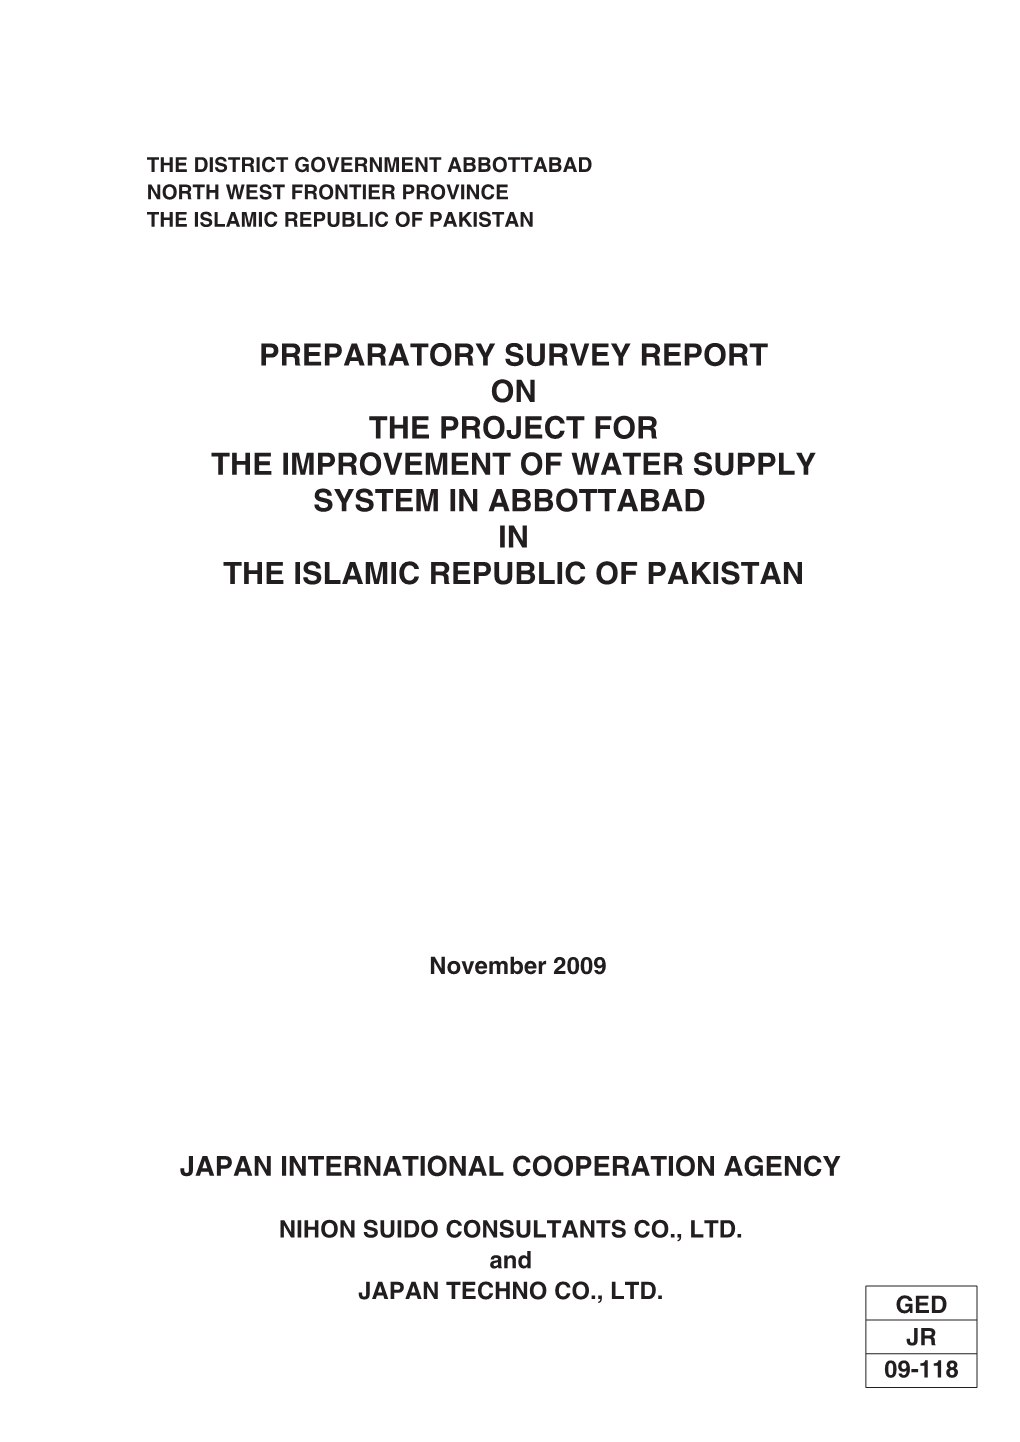 Preparatory Survey Report on the Project for the Improvement of Water Supply System in Abbottabad in the Islamic Republic of Pakistan